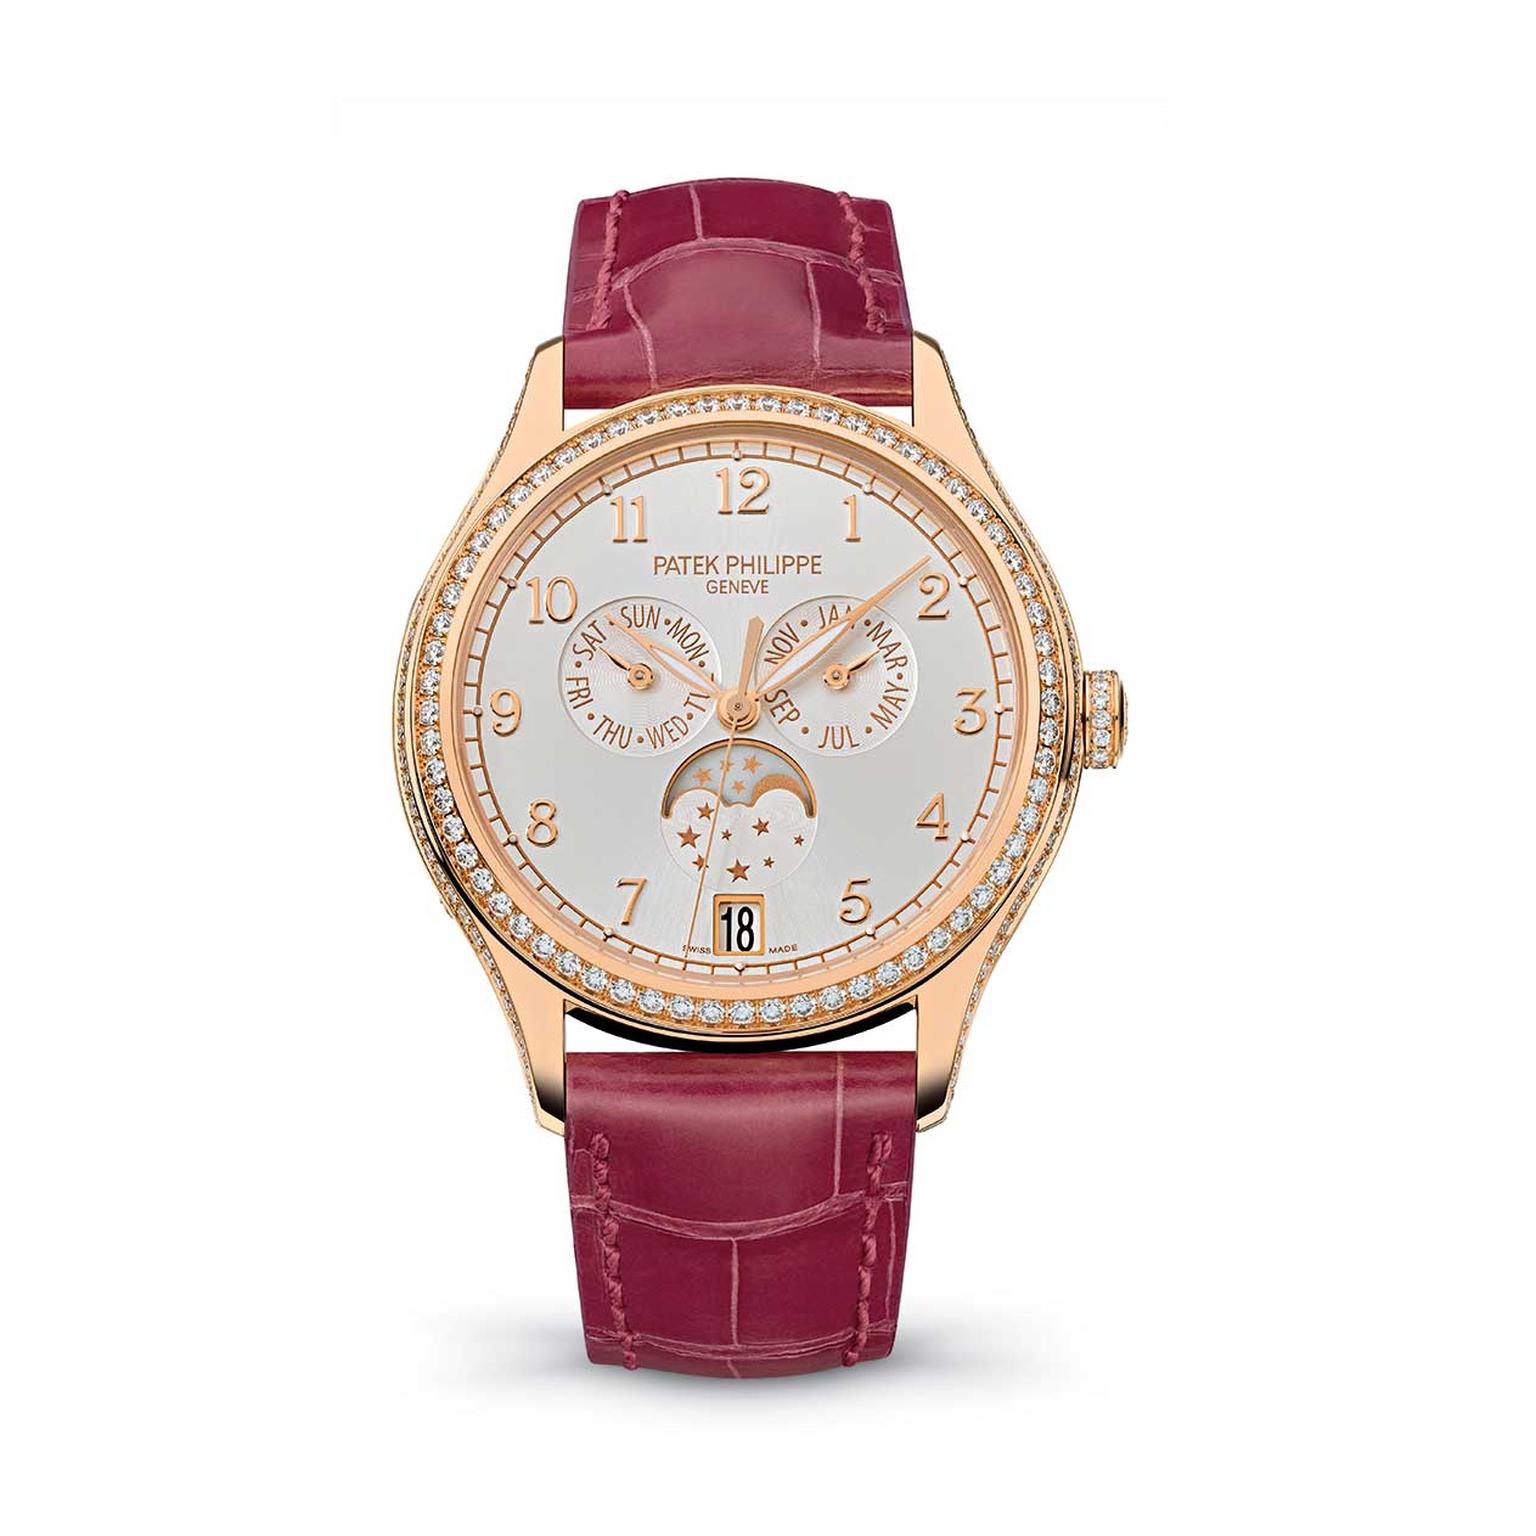 Patek Philippe Annual Calendar rose gold with pink strap